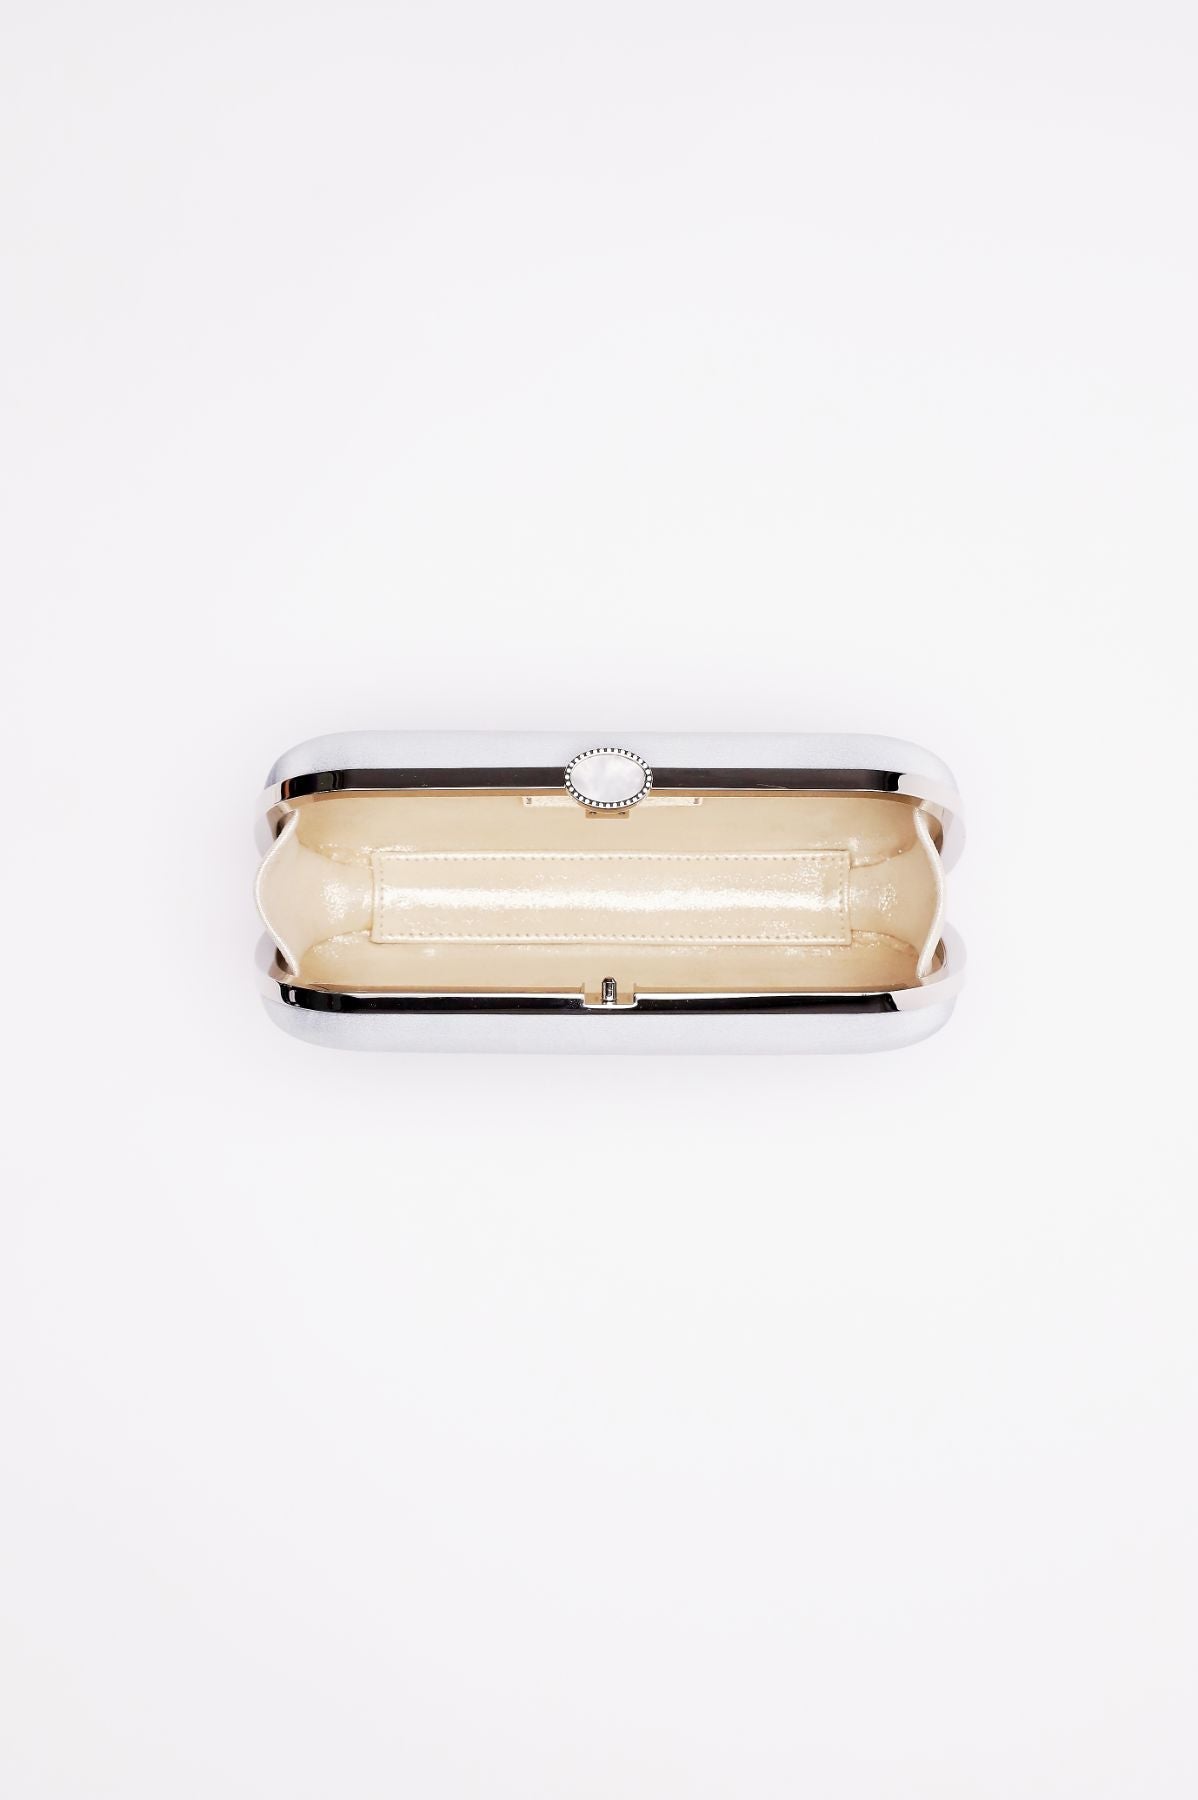 An unwound roll of Bella Clutch Steel Blue Satin Petite tape in a dispenser on a white background.